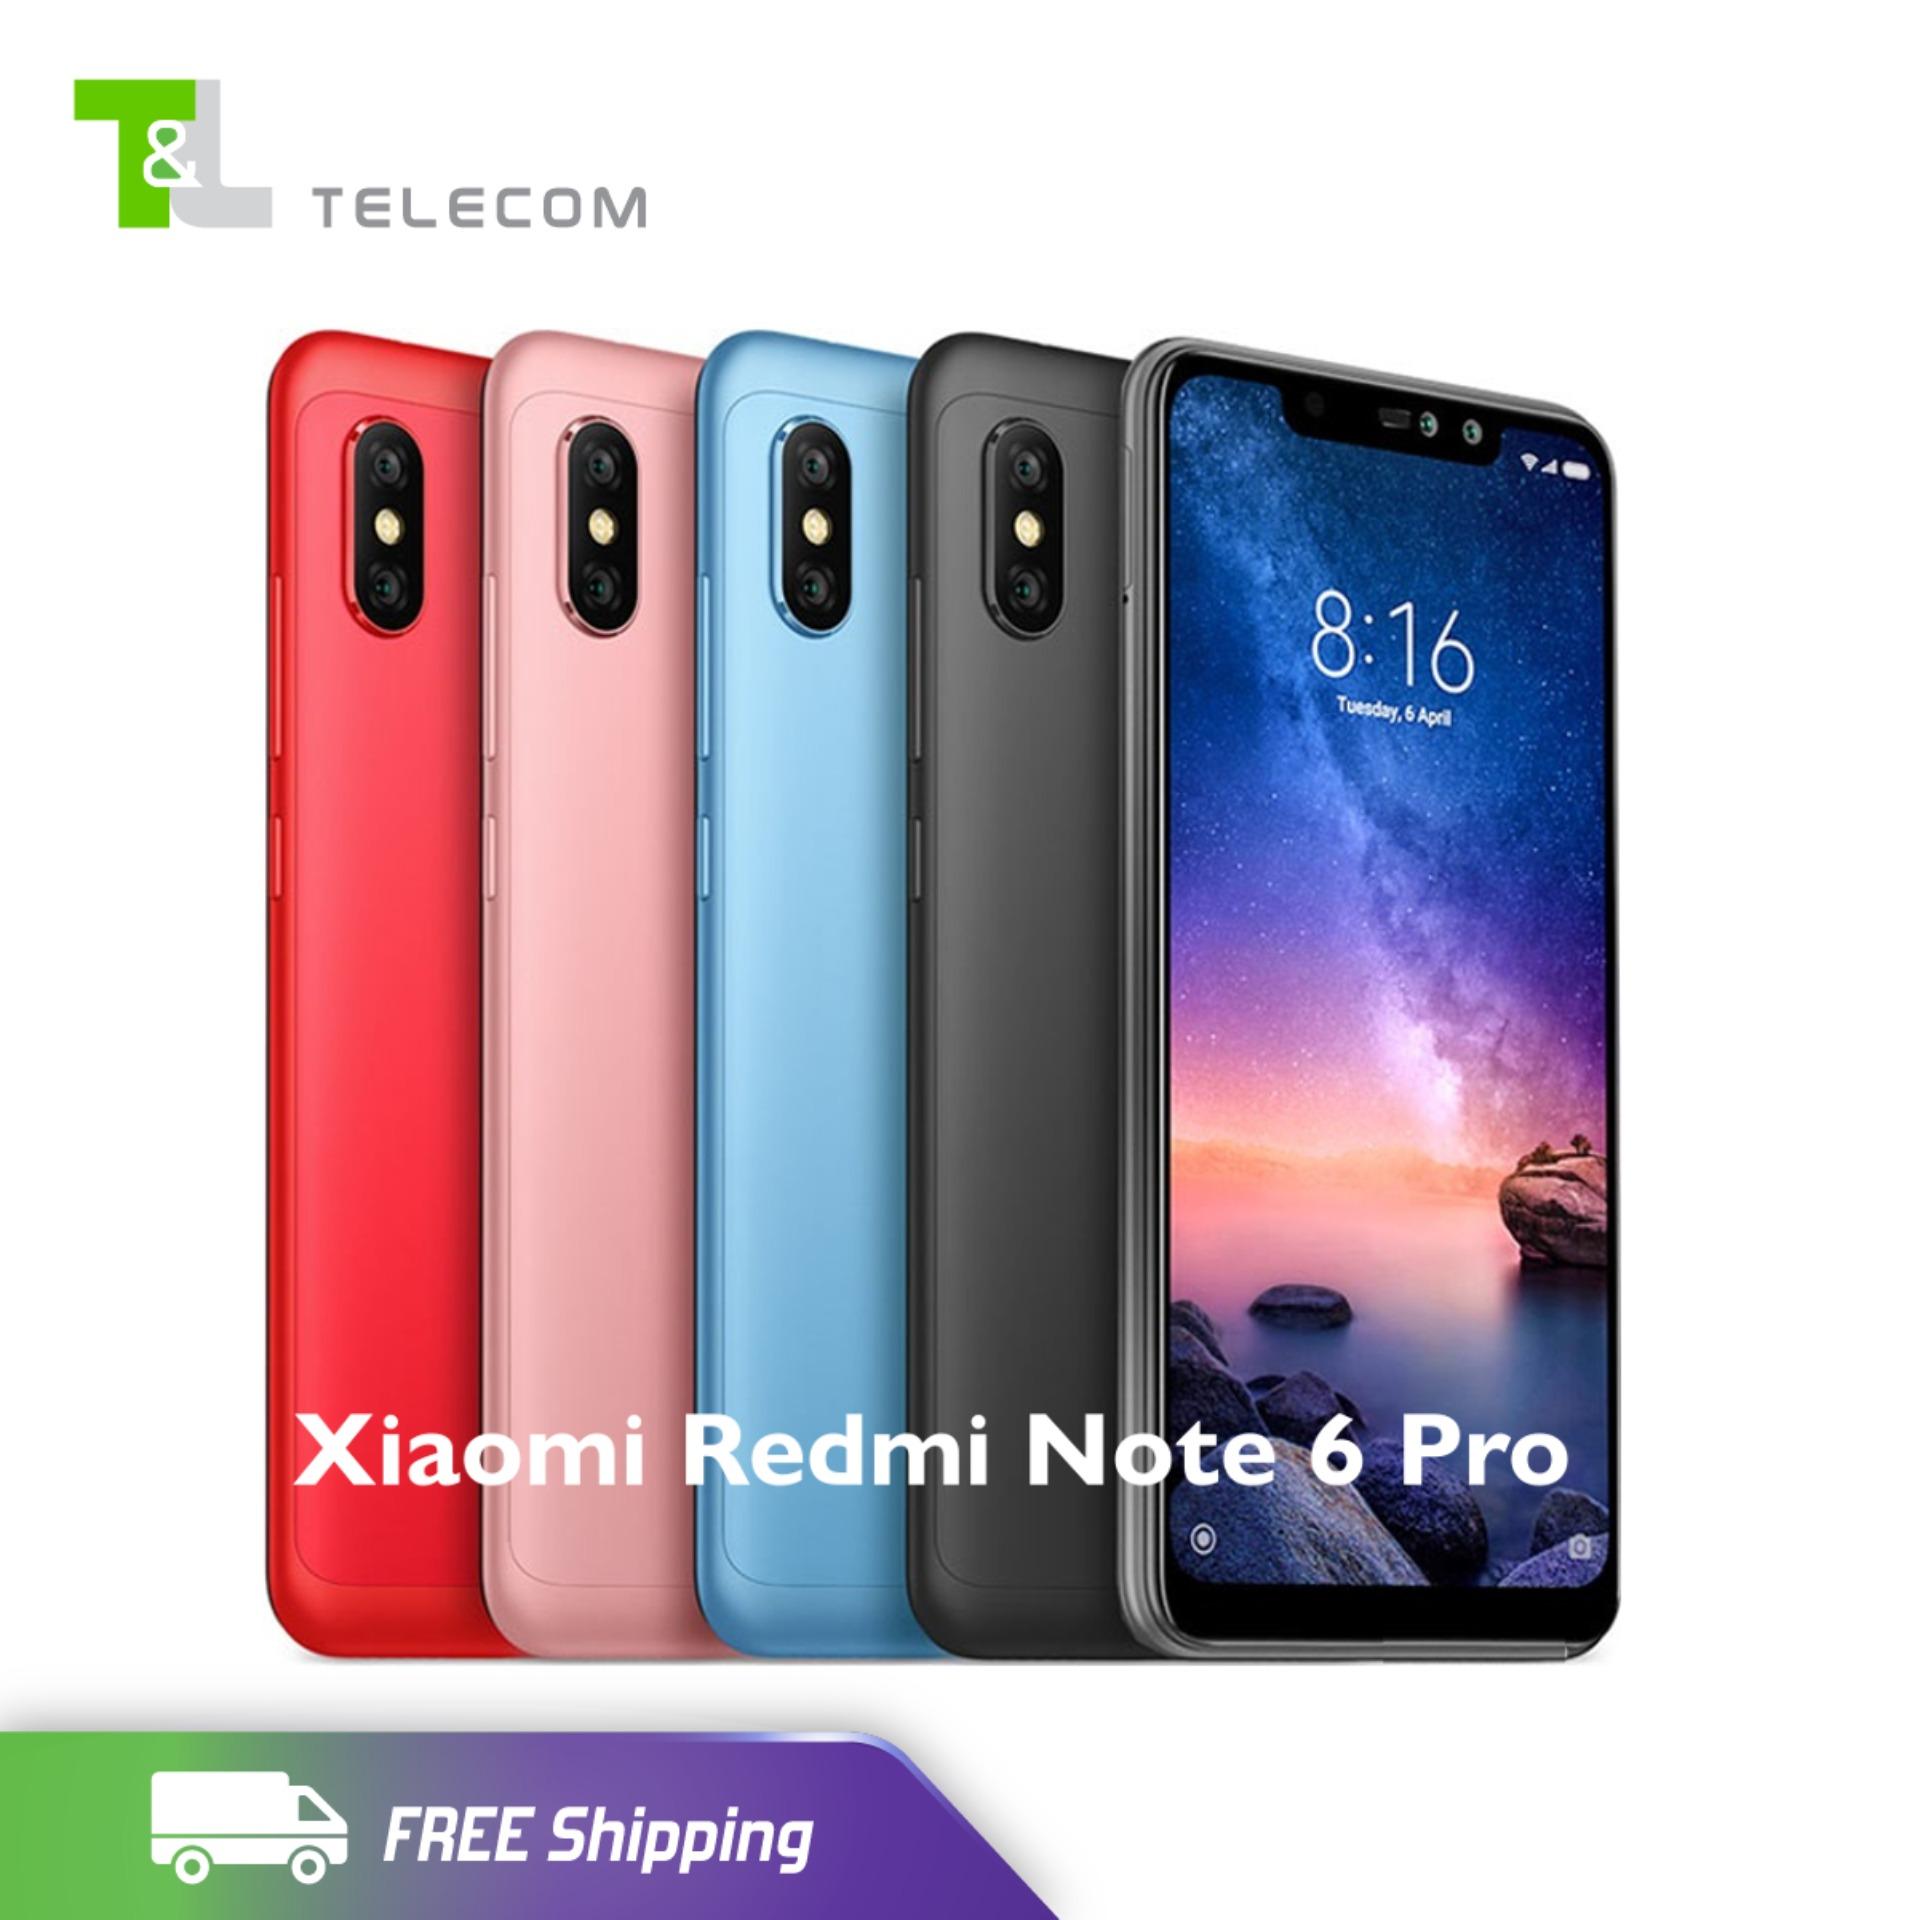 Redmi 6 Pro Specs And Price Philippines - Gadget To Review